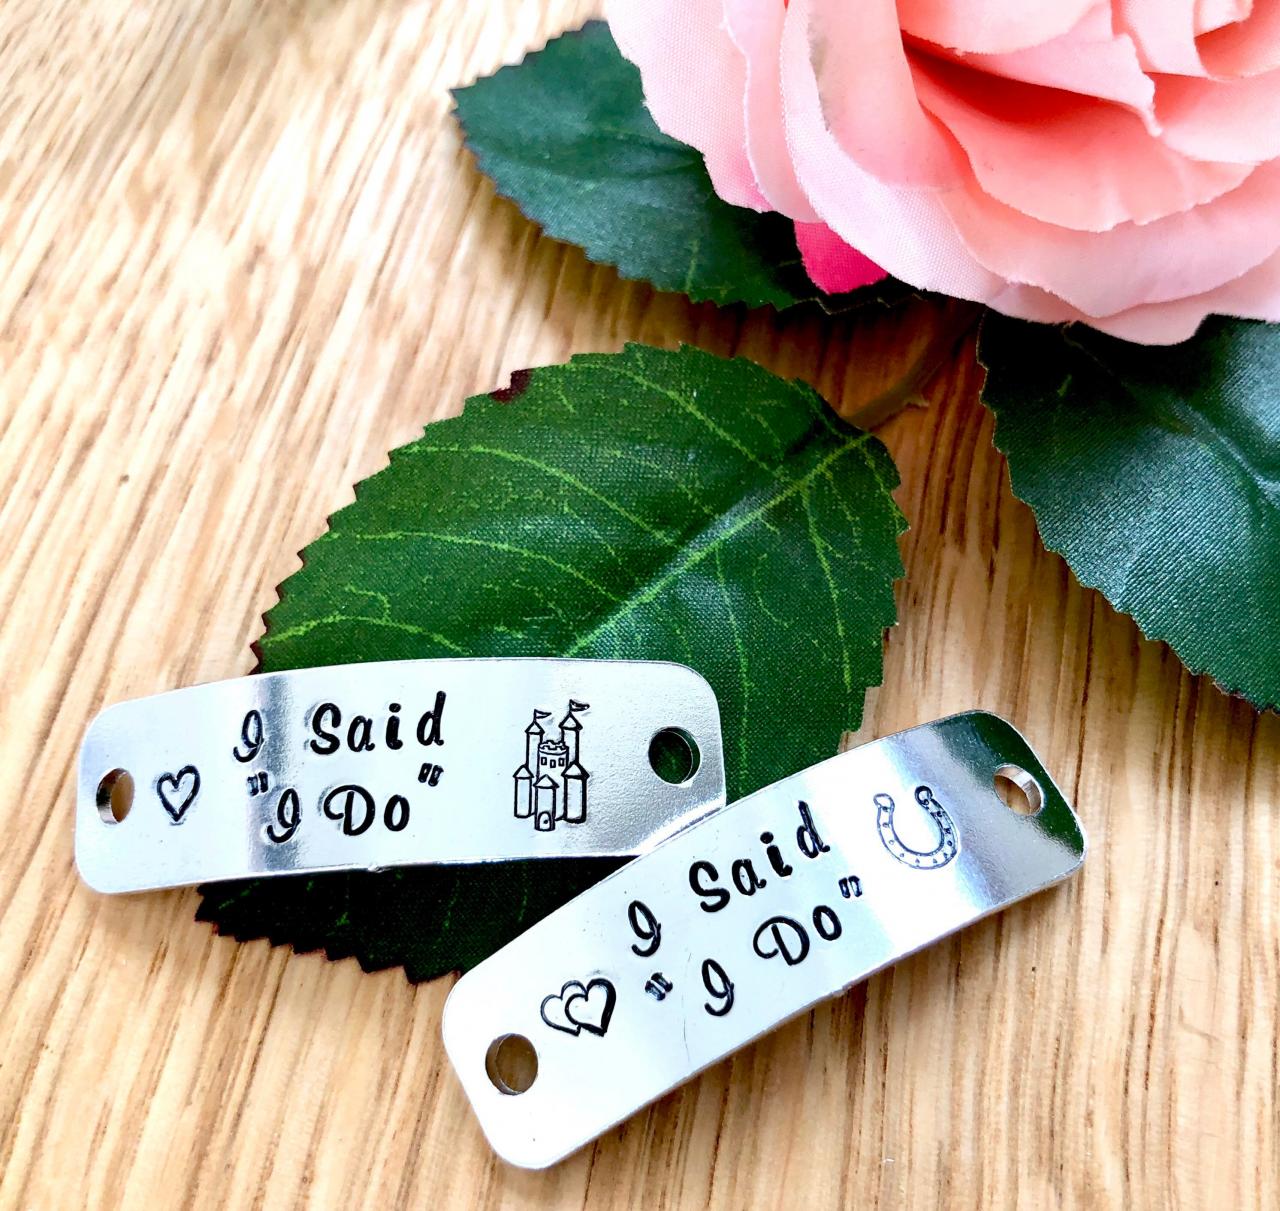 Wedding Shoes, Weddinng Trainers, Wedding Converse, Wedding Sneakers, Unique Wedding, Quirky Wedding,trainer Tags, Gift For Her, Shoe Tags,